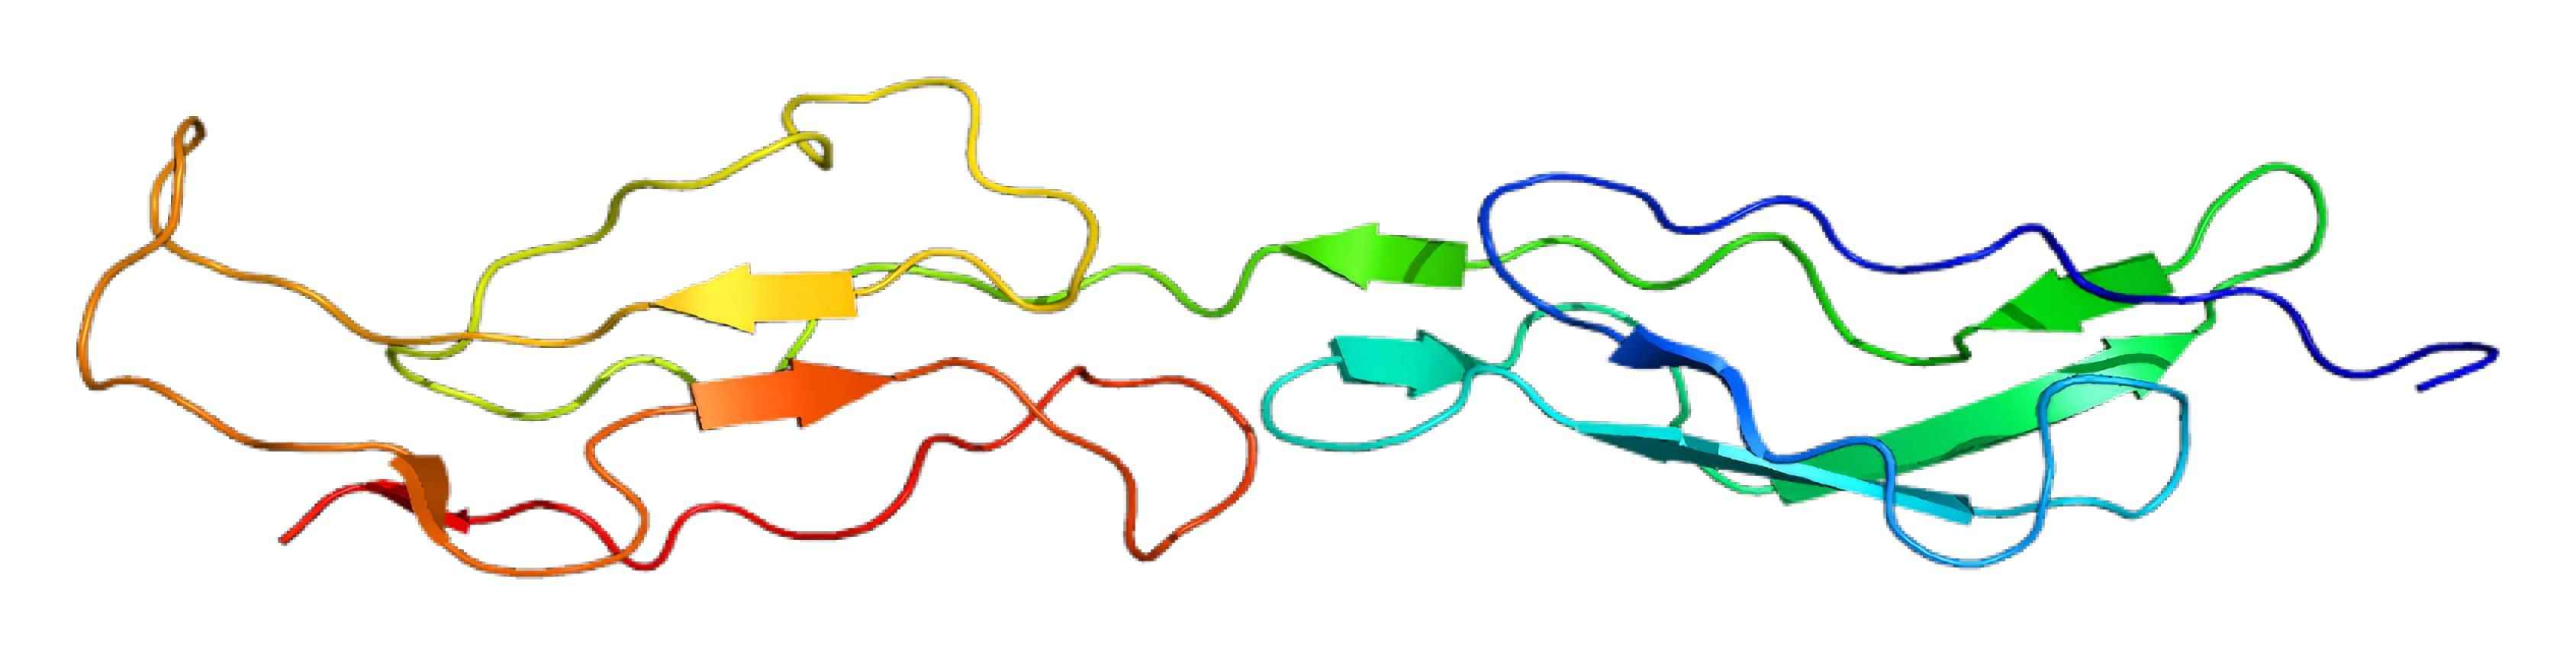 Fig. 1 Diagram of CR1structure. （By Emw - Own work, https://commons.wikimedia.org/wiki/File:Protein_CR1_PDB_1gkg.png)